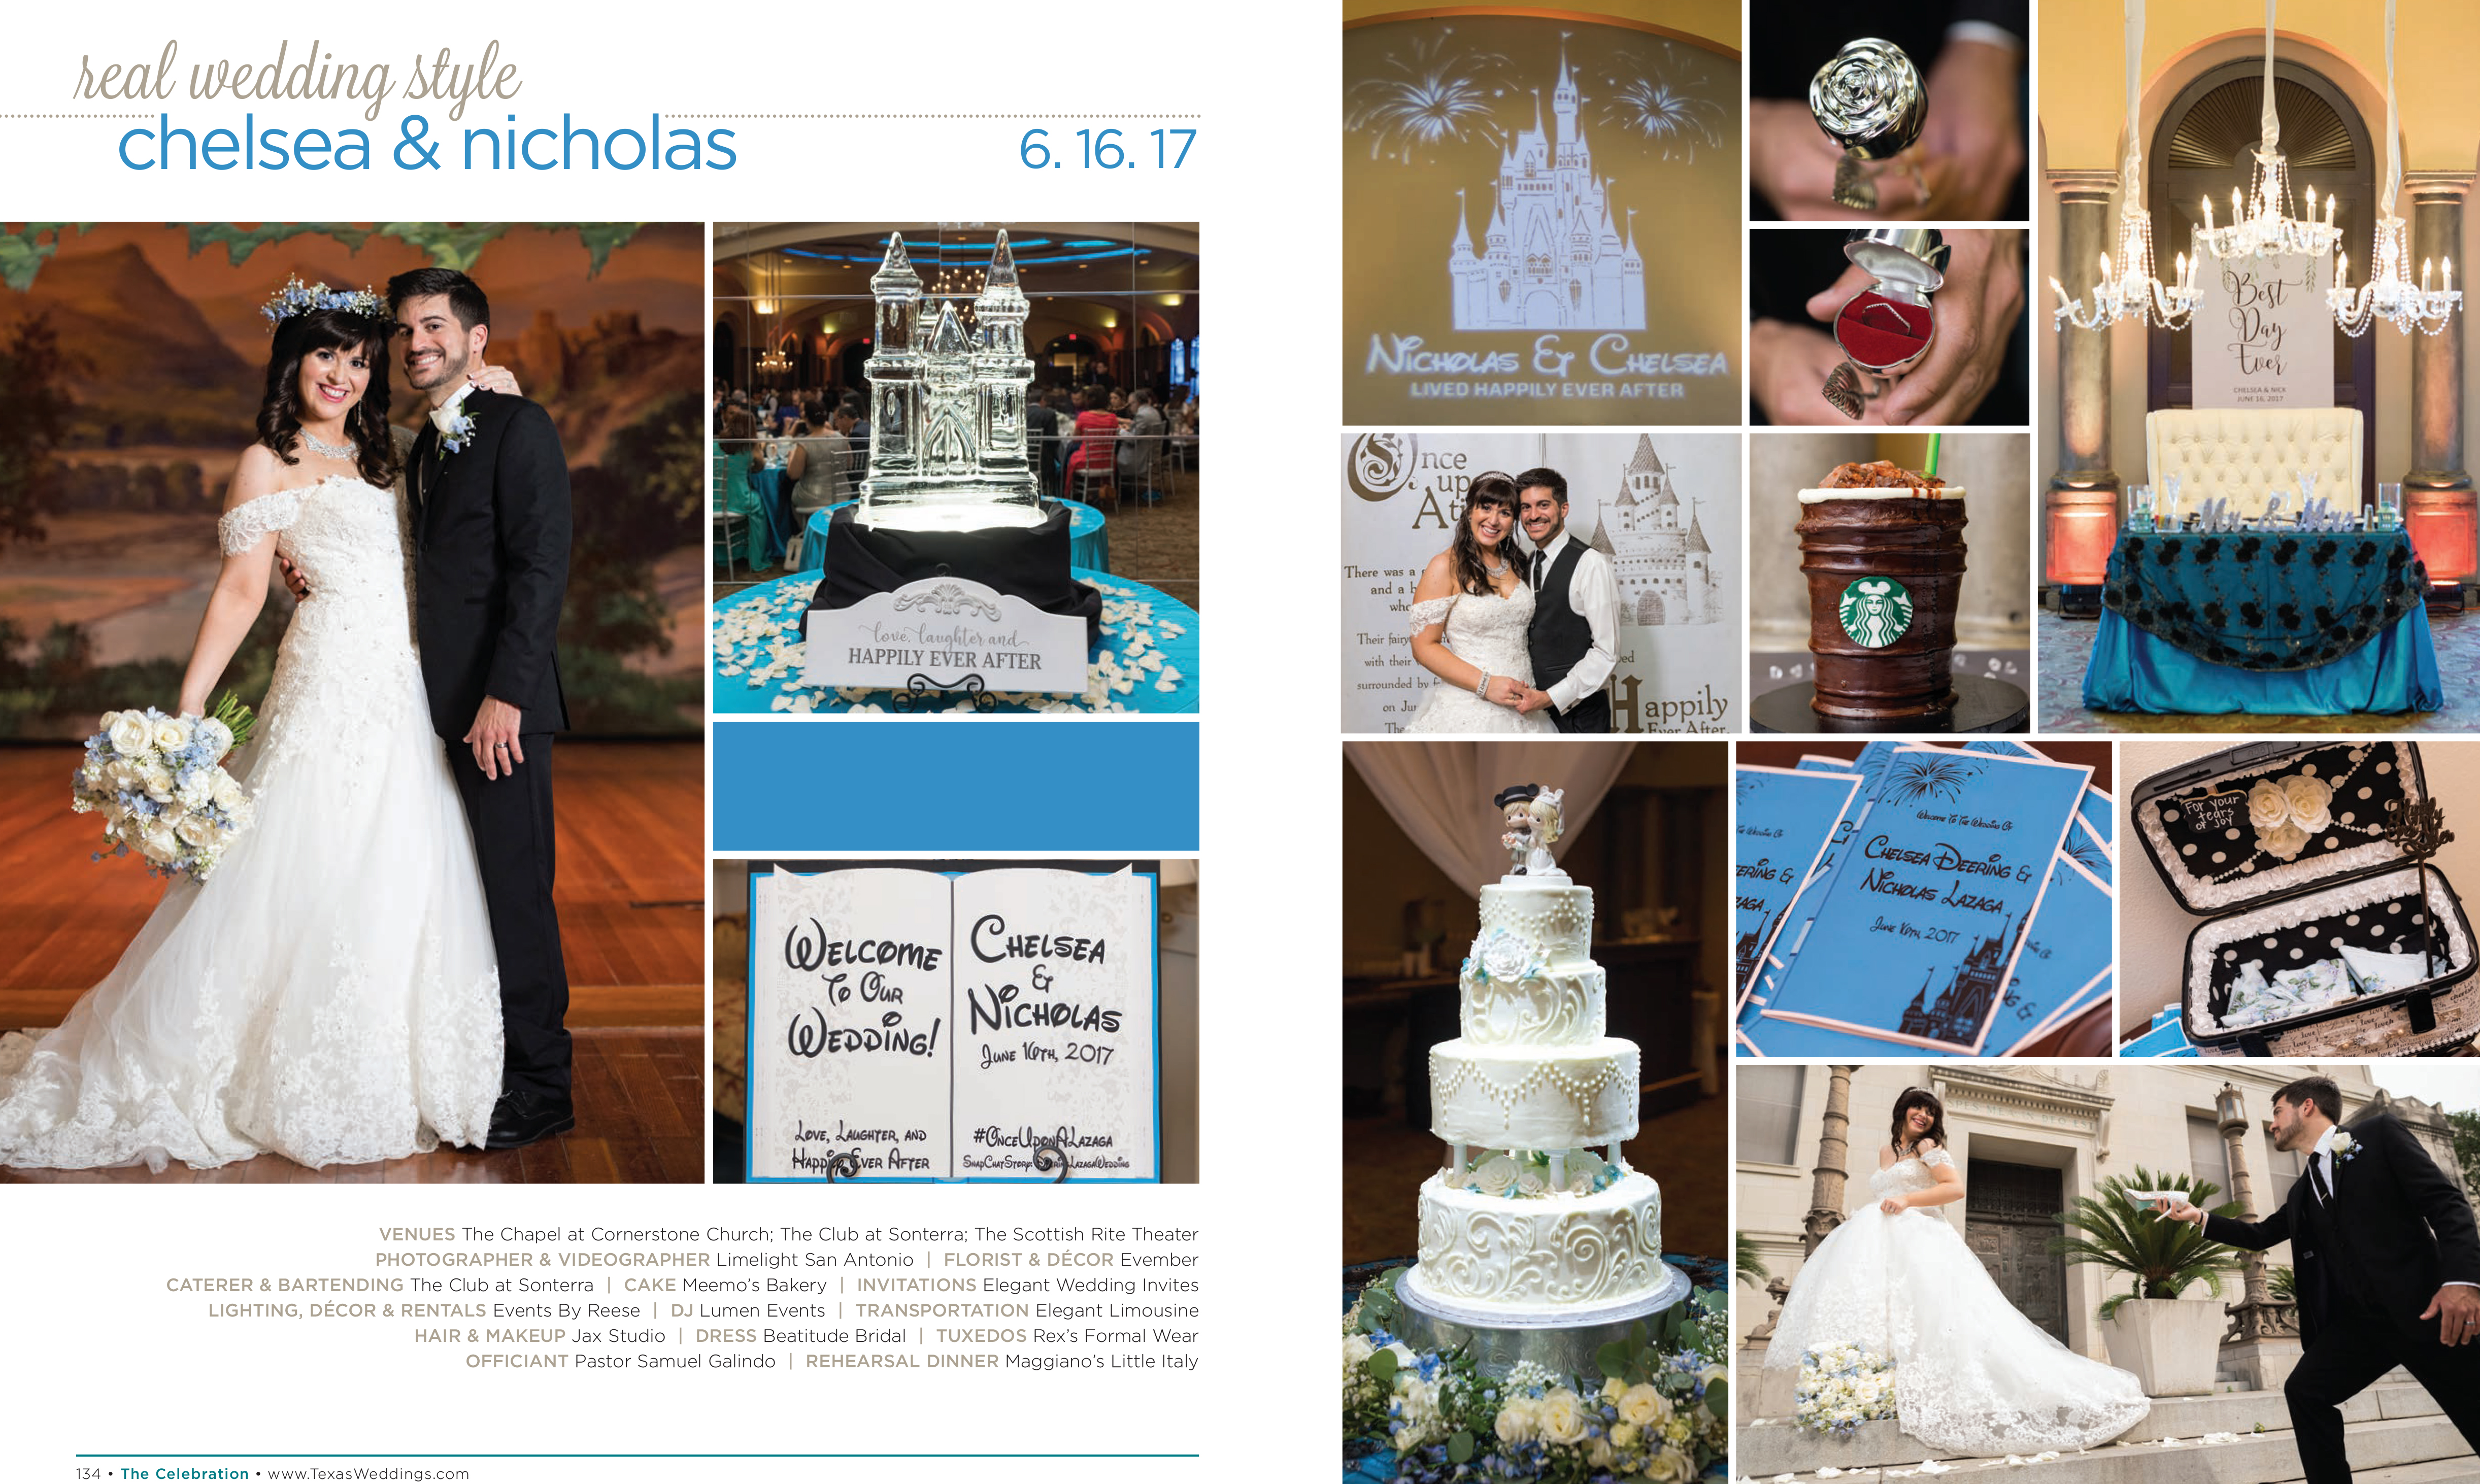 Chelsea & Nicholas in their Real Wedding Page in the Fall/Winter 2017 Texas Wedding Guide